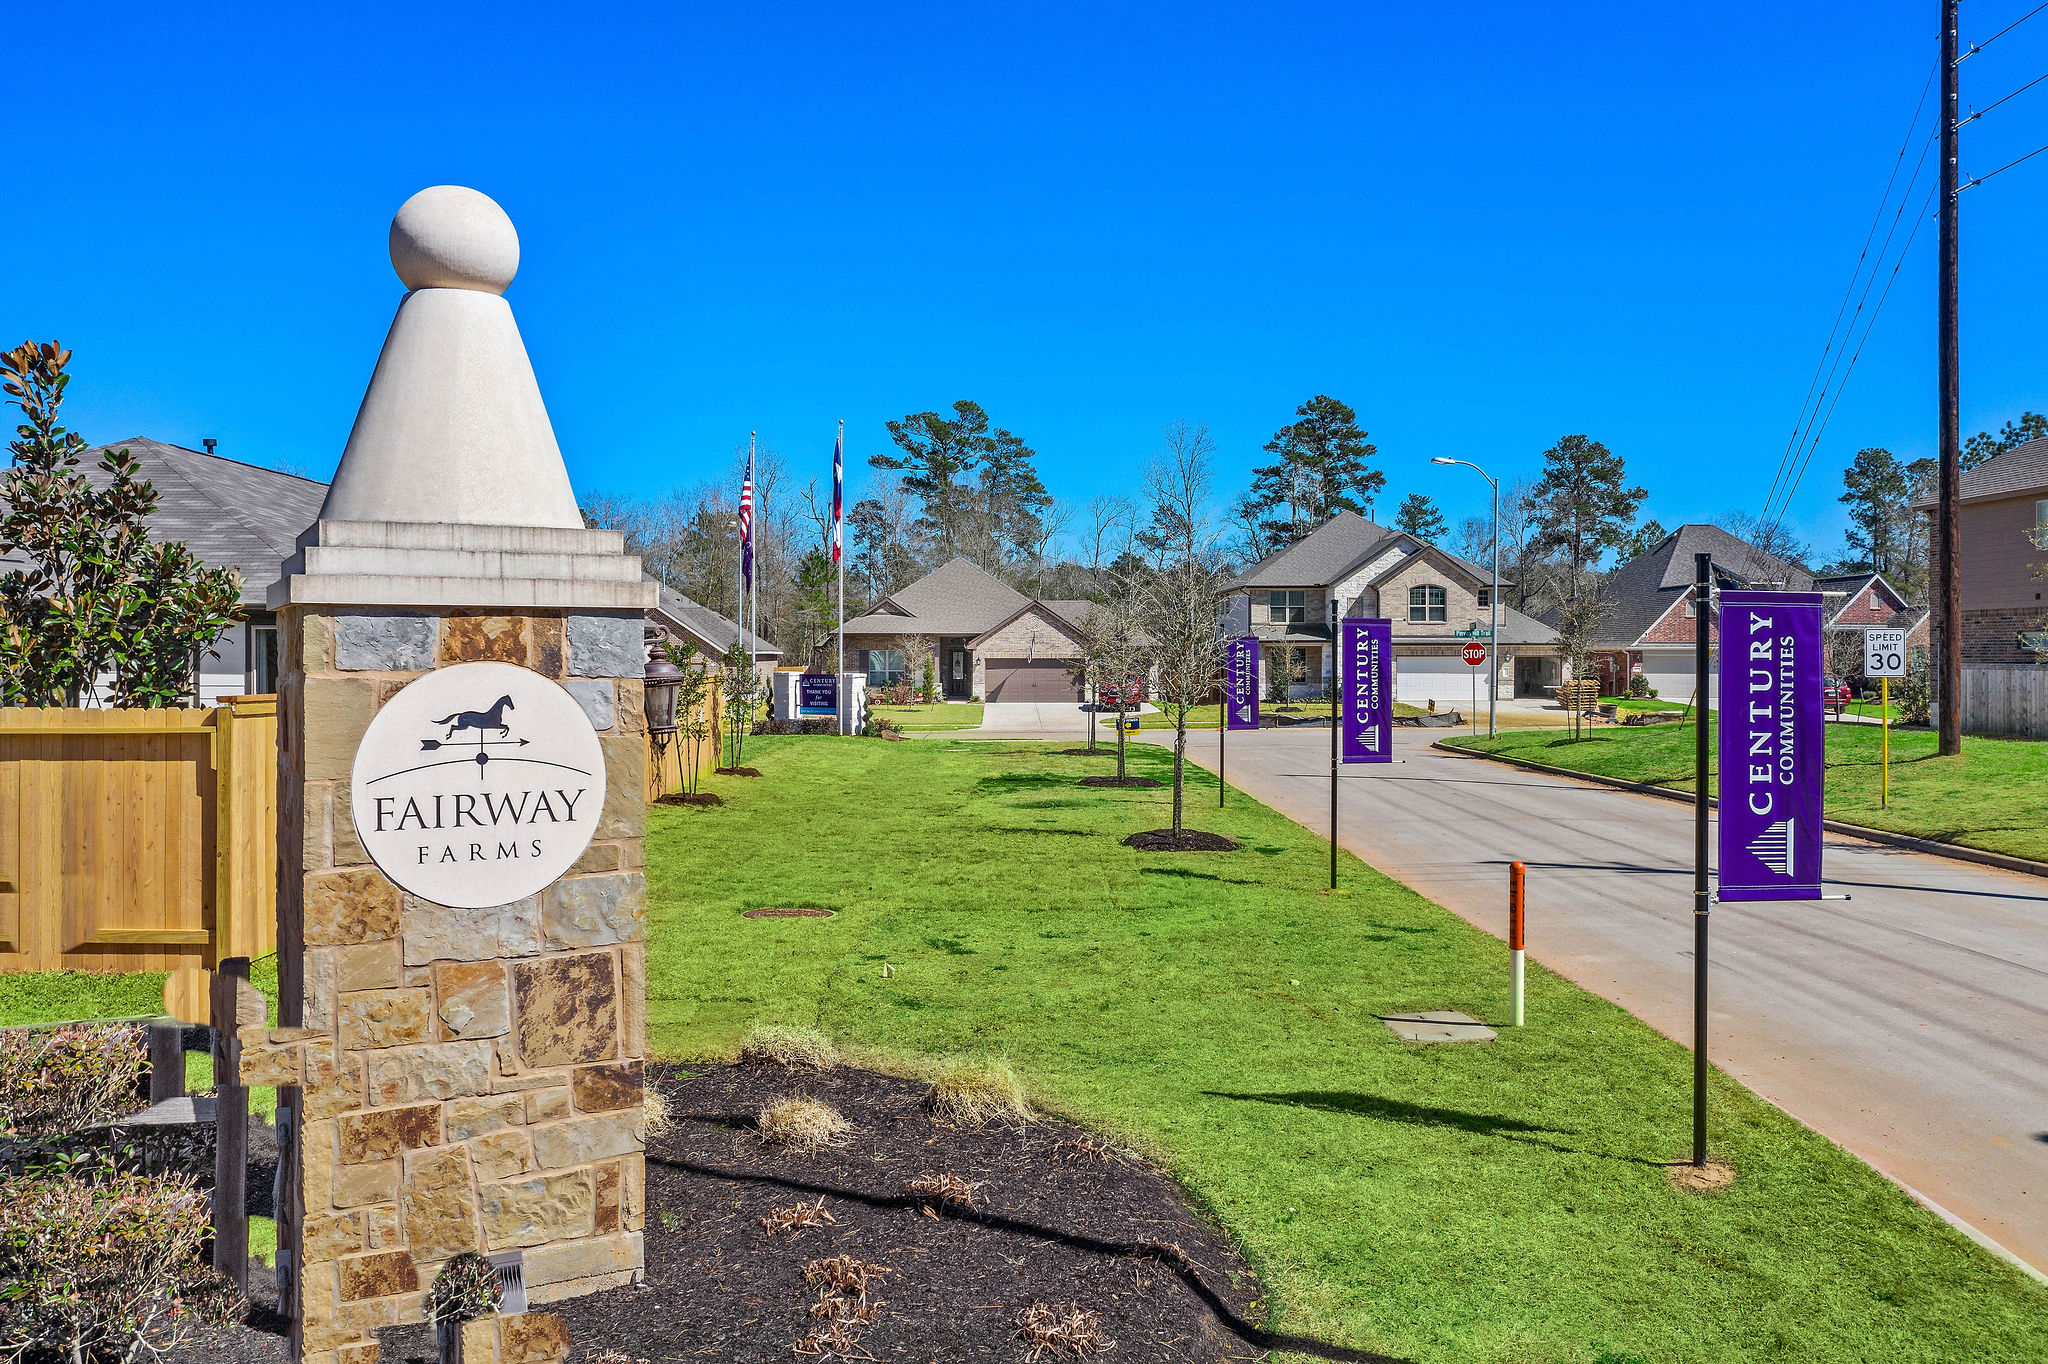 Street view of Fairway Farms in Tomball, TX